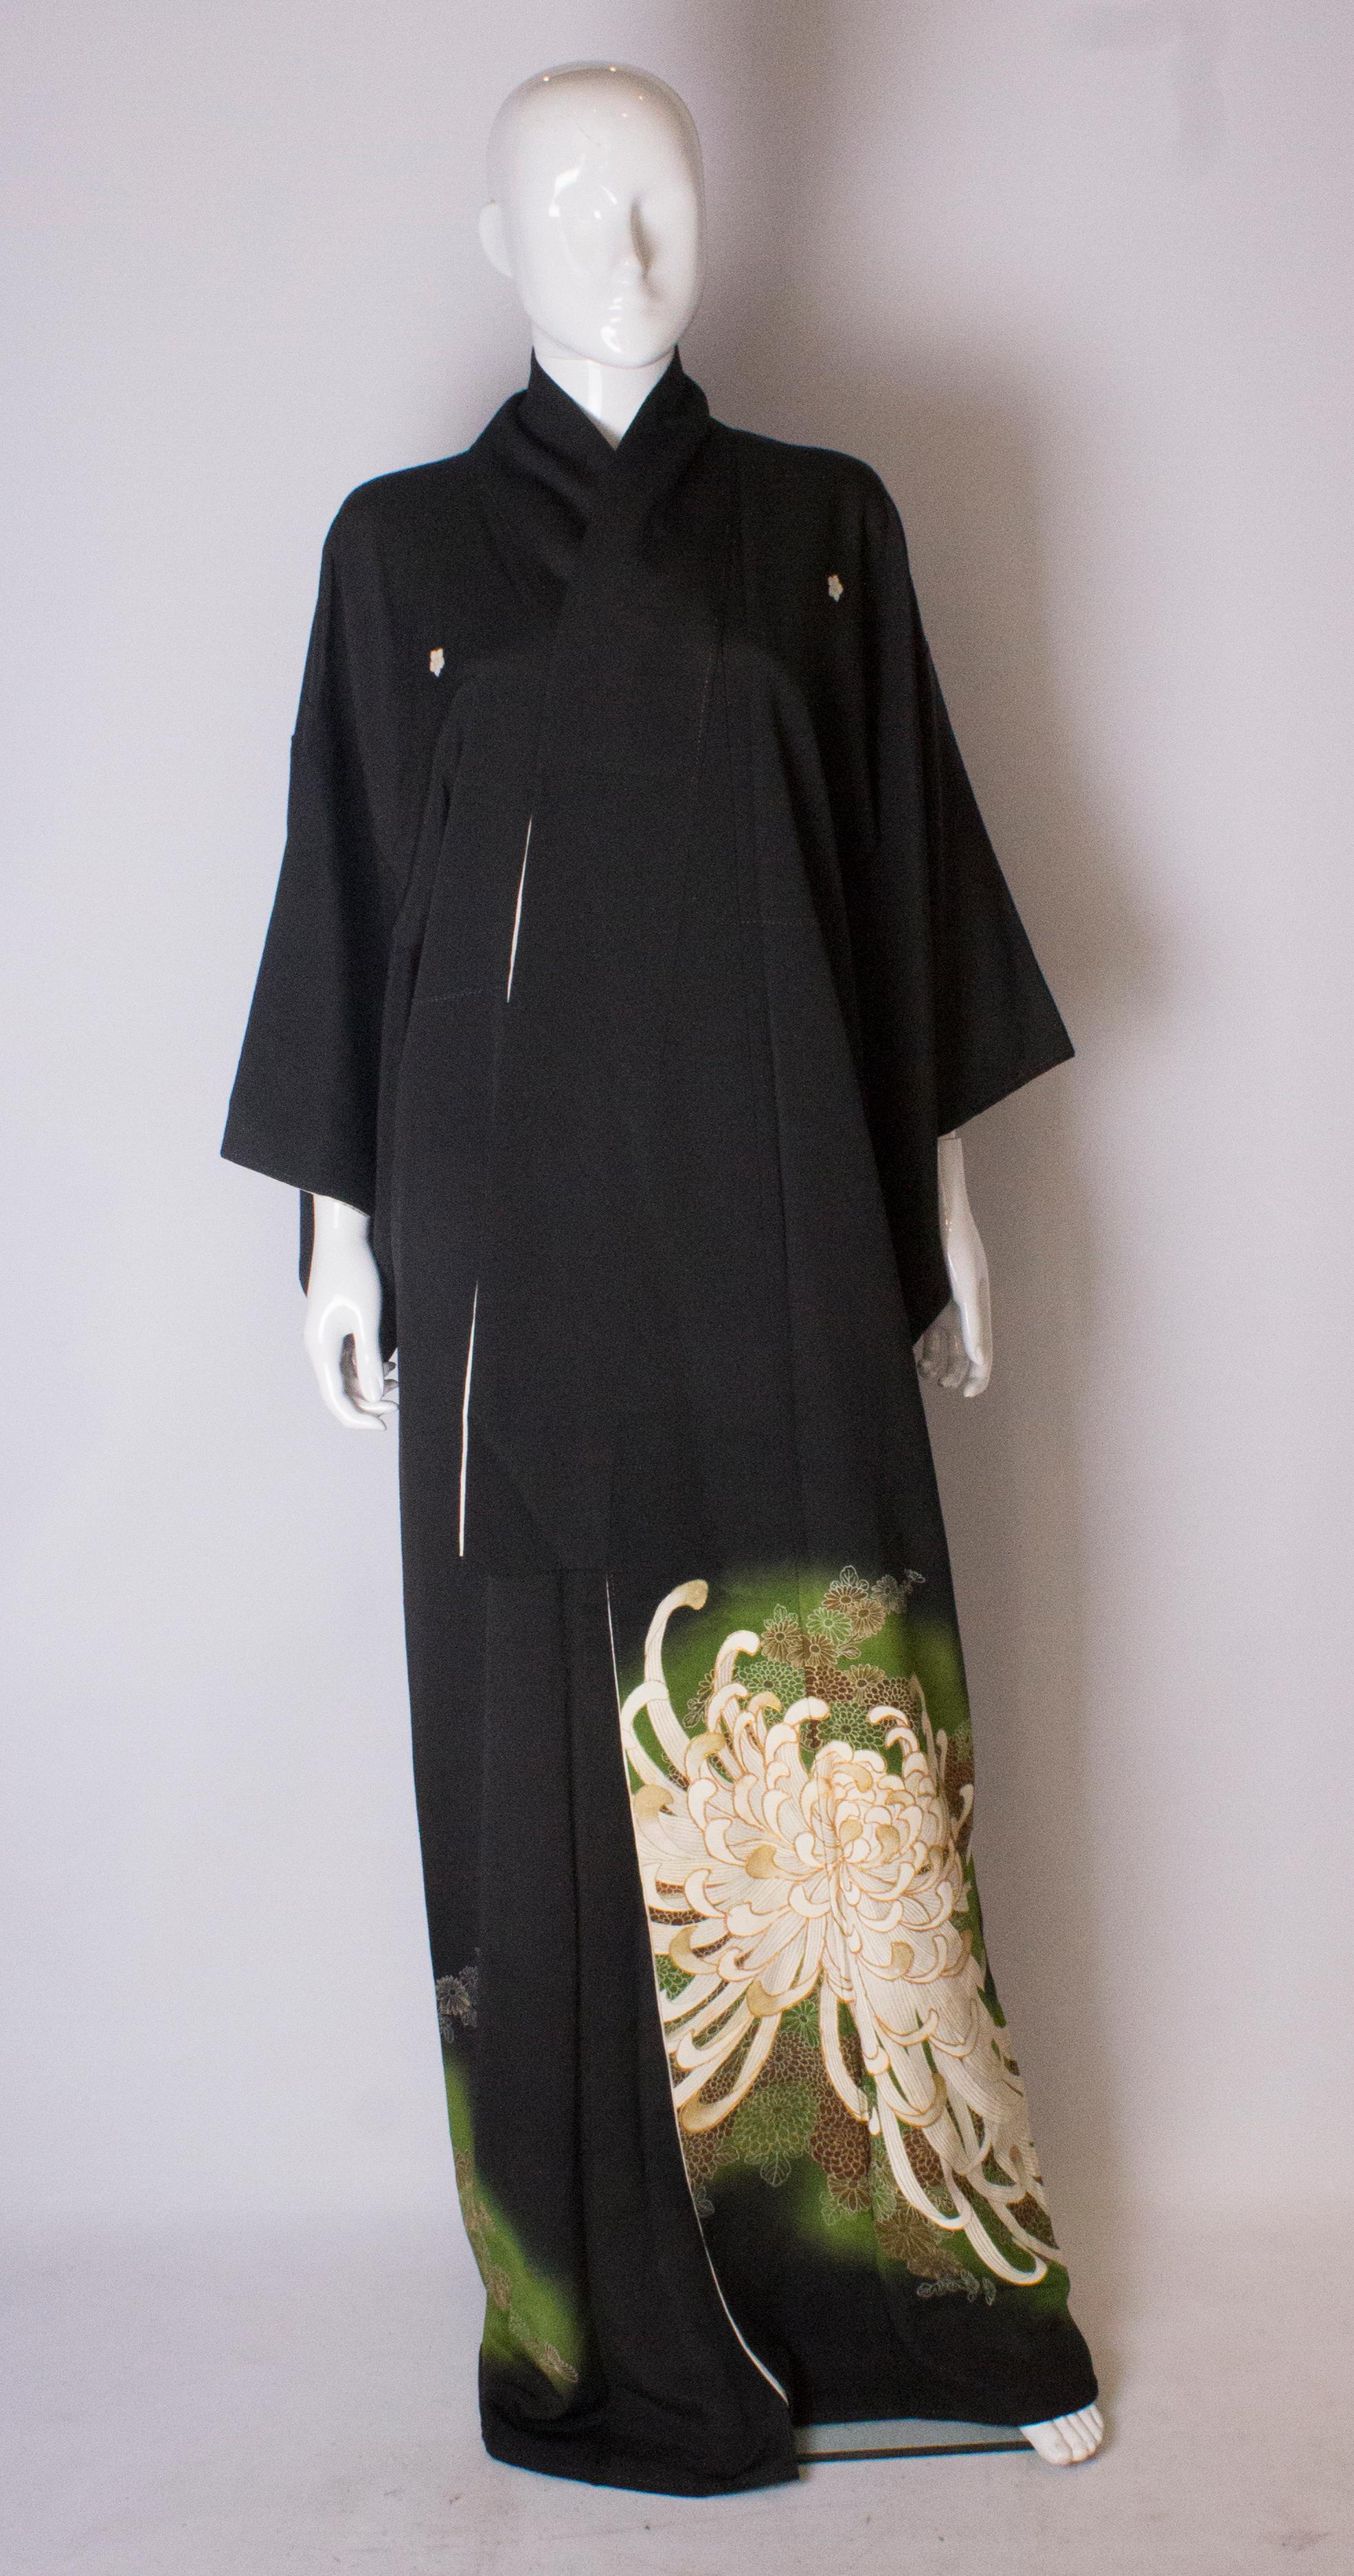 A chic black kimono with stunning detail on the lower area. The black kimono is lined in silk, and has wonderful embroidered detail near the hem. Measurements; bust up to 44'', length 164''.